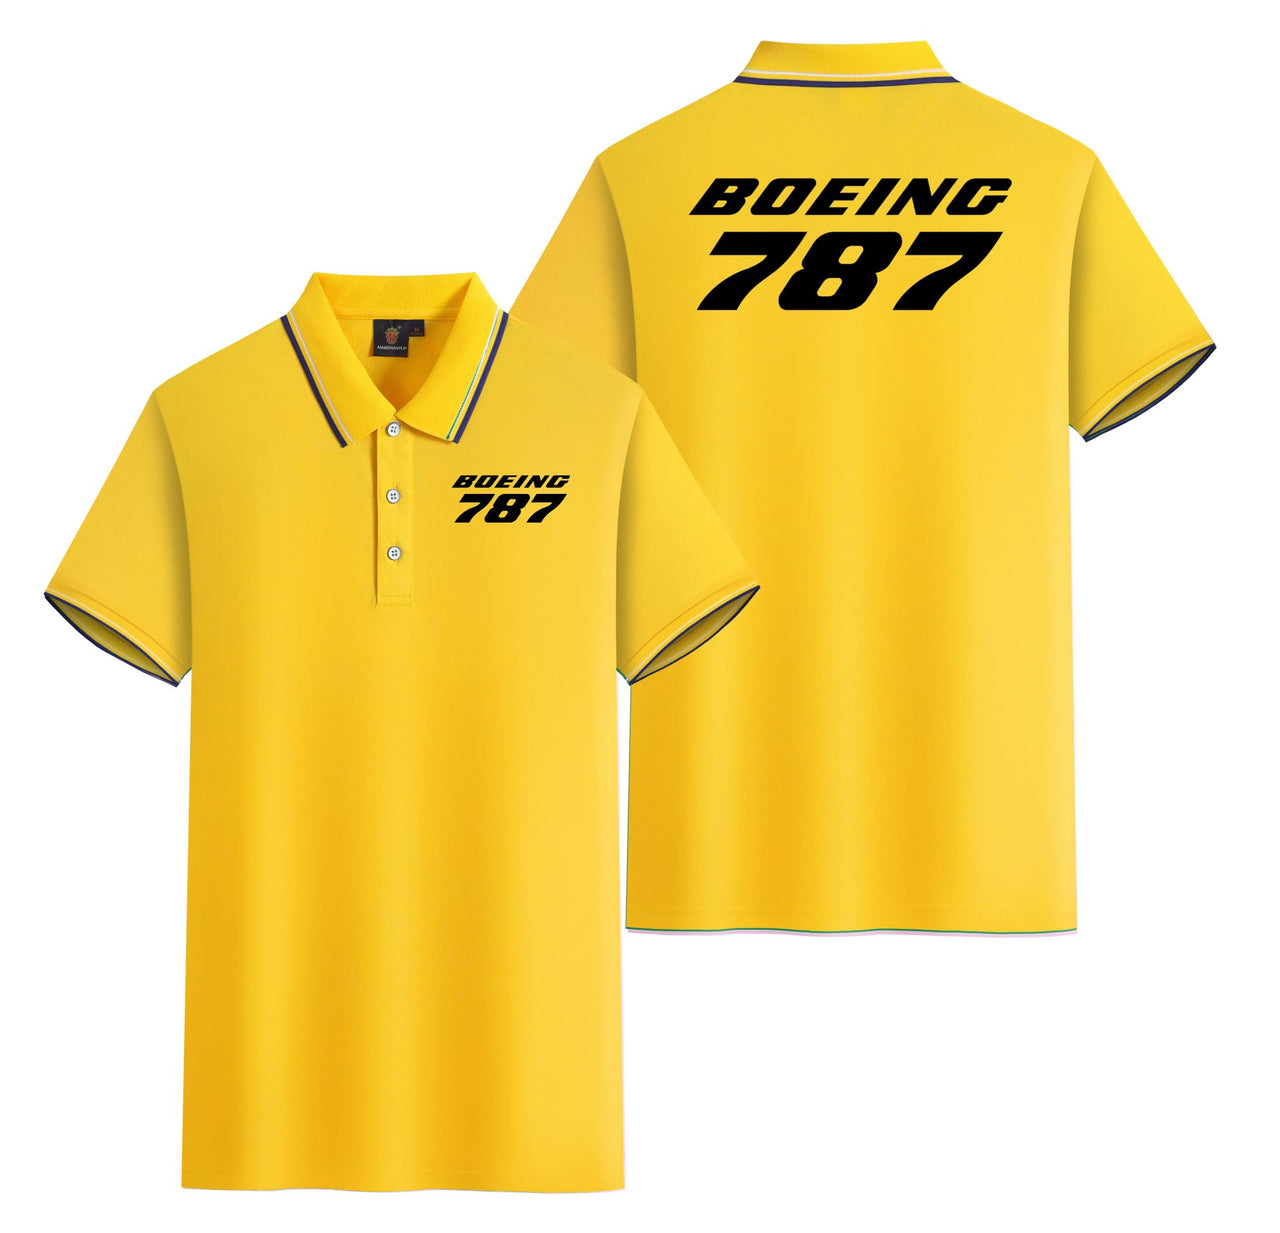 Boeing 787 & Text Designed Stylish Polo T-Shirts (Double-Side)